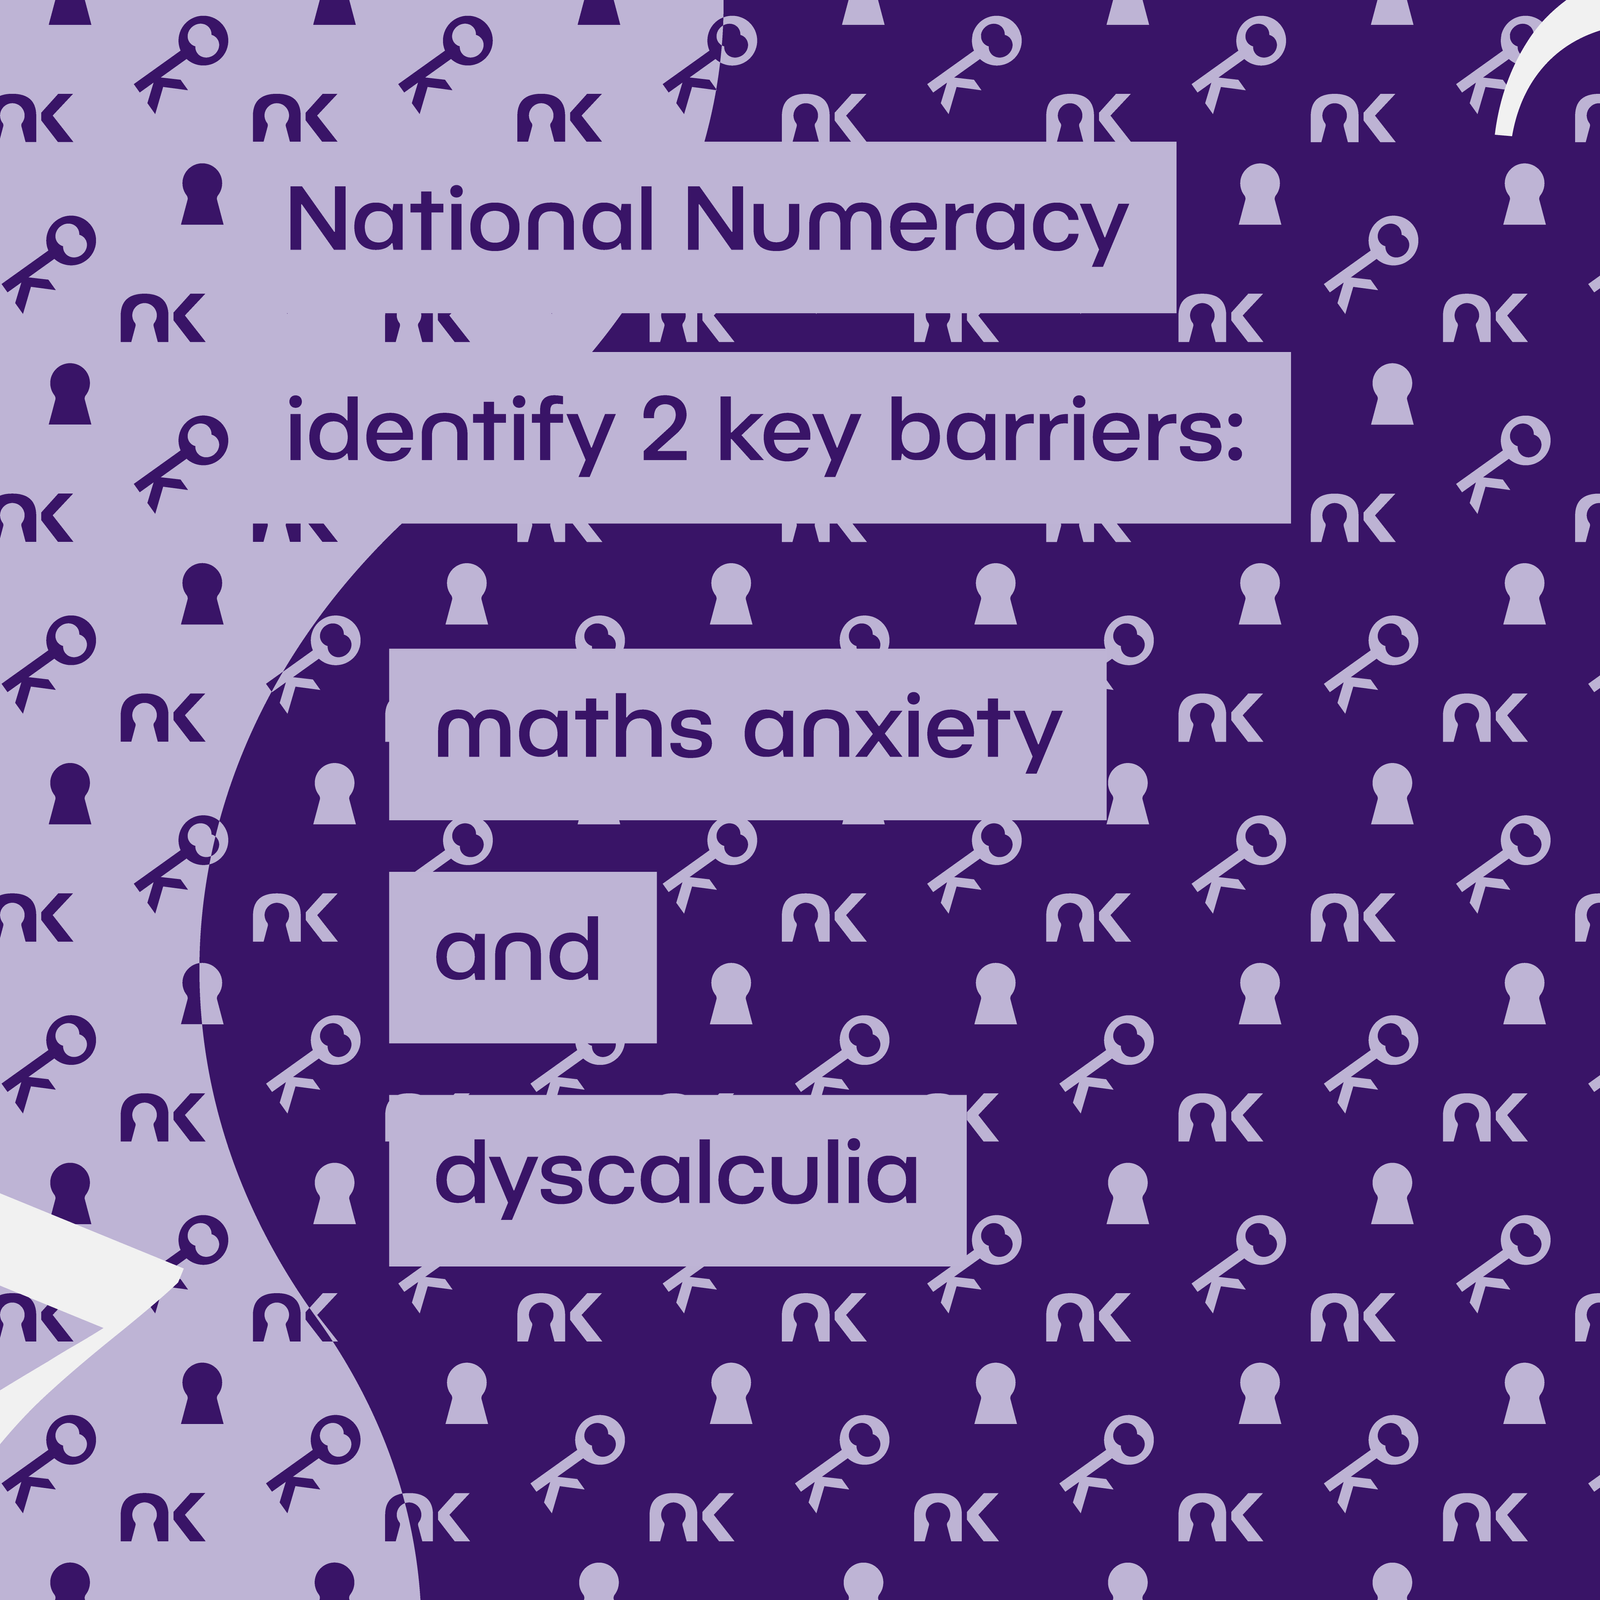 Text says: "National Numeracy identify 2 key barriers: maths anxiety and dyscalculia."